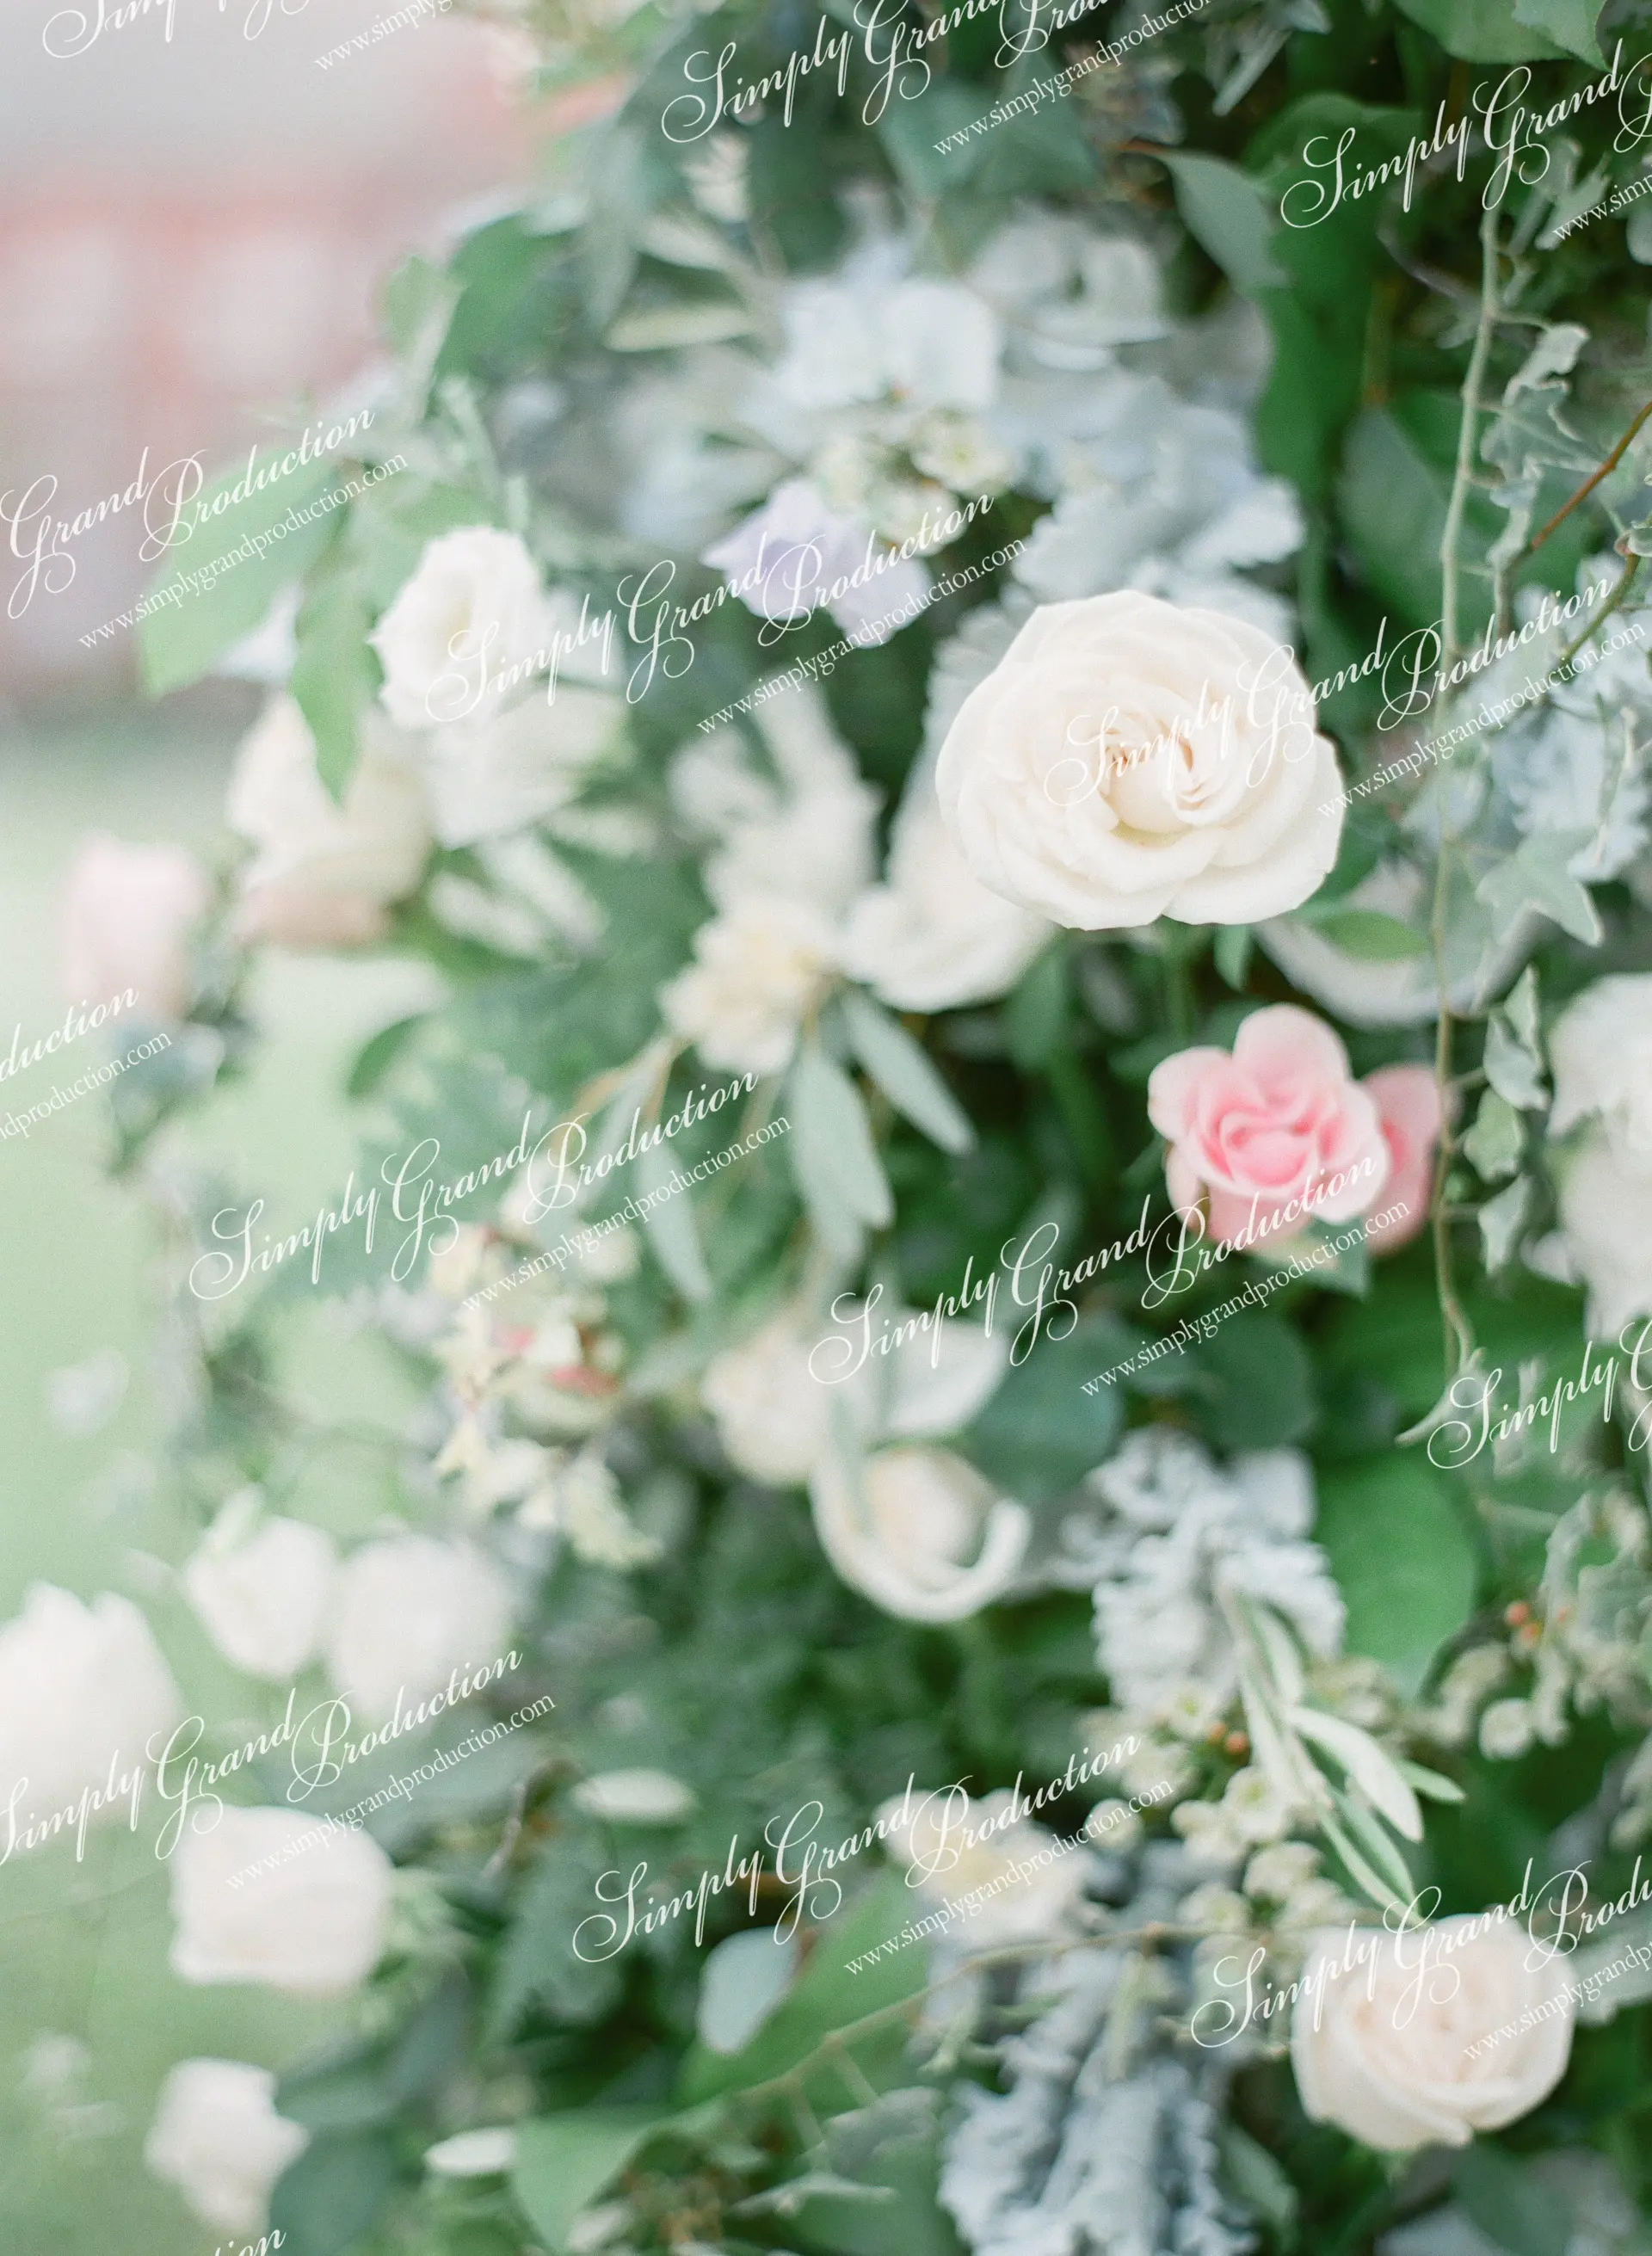 Simply_Grand_Production_Outdoor_wedding_decoration_photoshoot_Adventist_College_greenery_rose_2_8.jpg